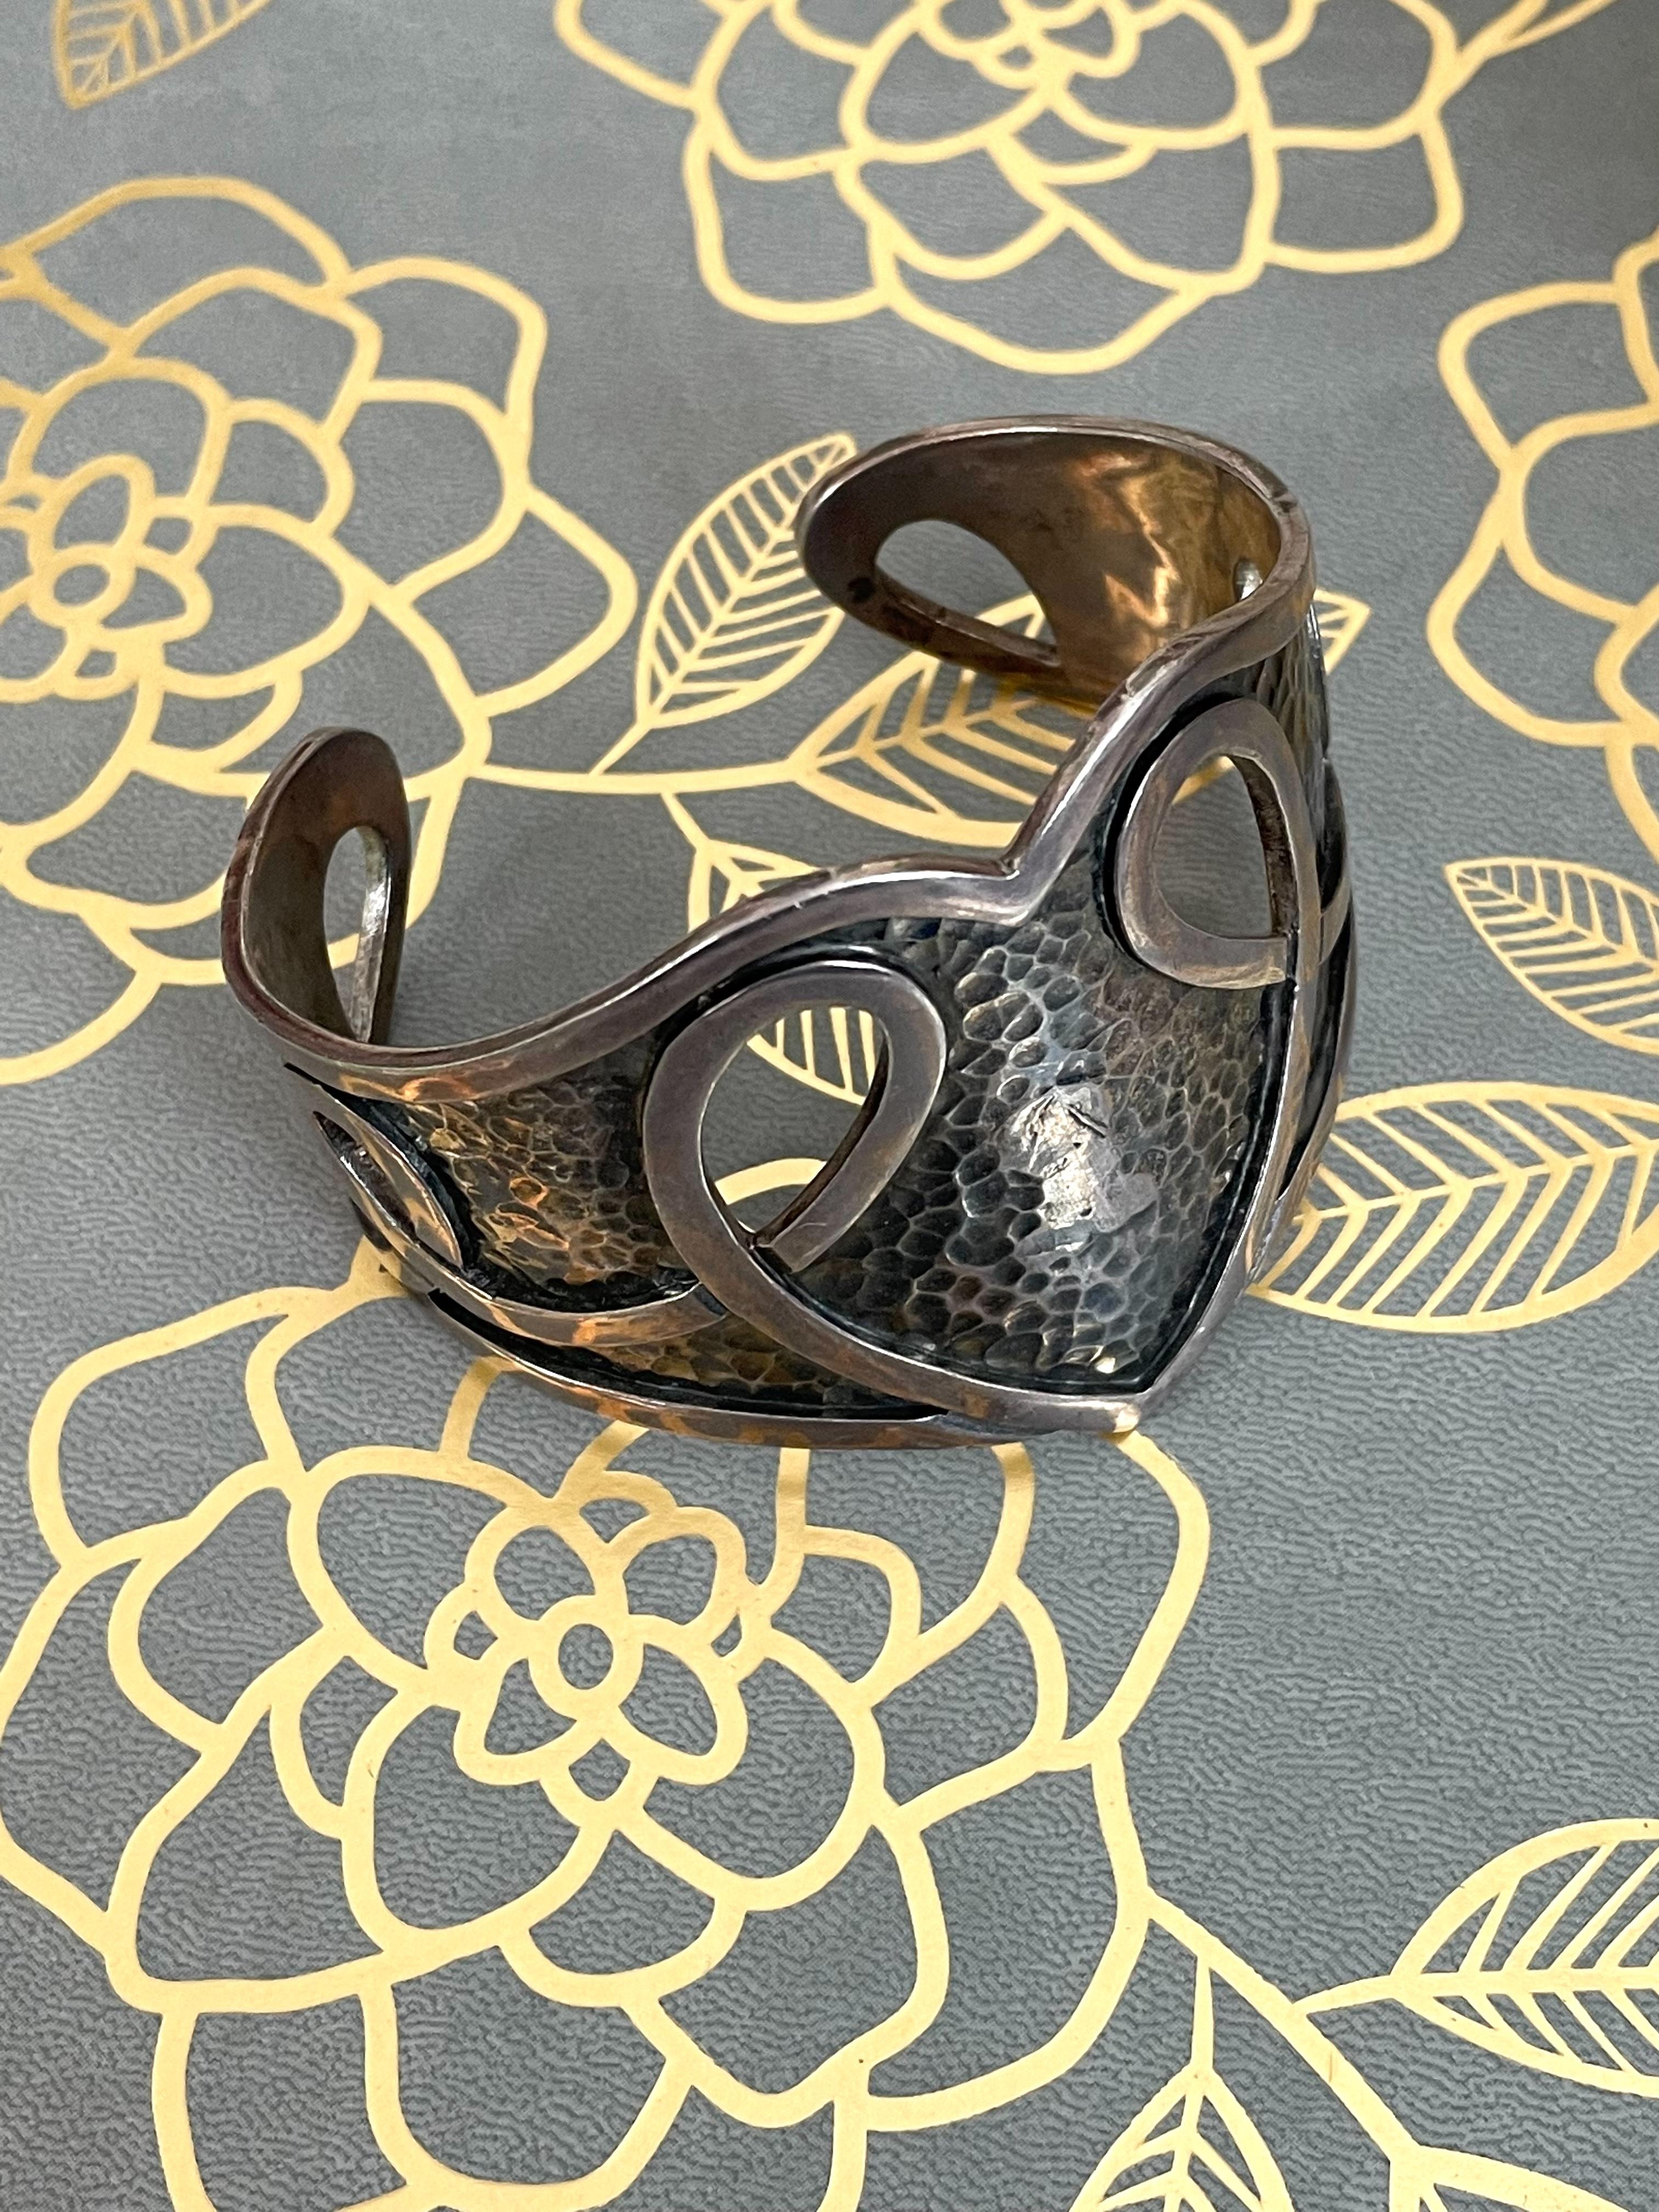 This classic Margot de Taxco Sterling Silver cuff bracelet features a beautiful heart-shaped design in the center of the cuff.

Stamp: MARGOT DE TAXCO 5195 MADE IN MEXICO STERLING

Dimensions:
Outside: 7-3/4